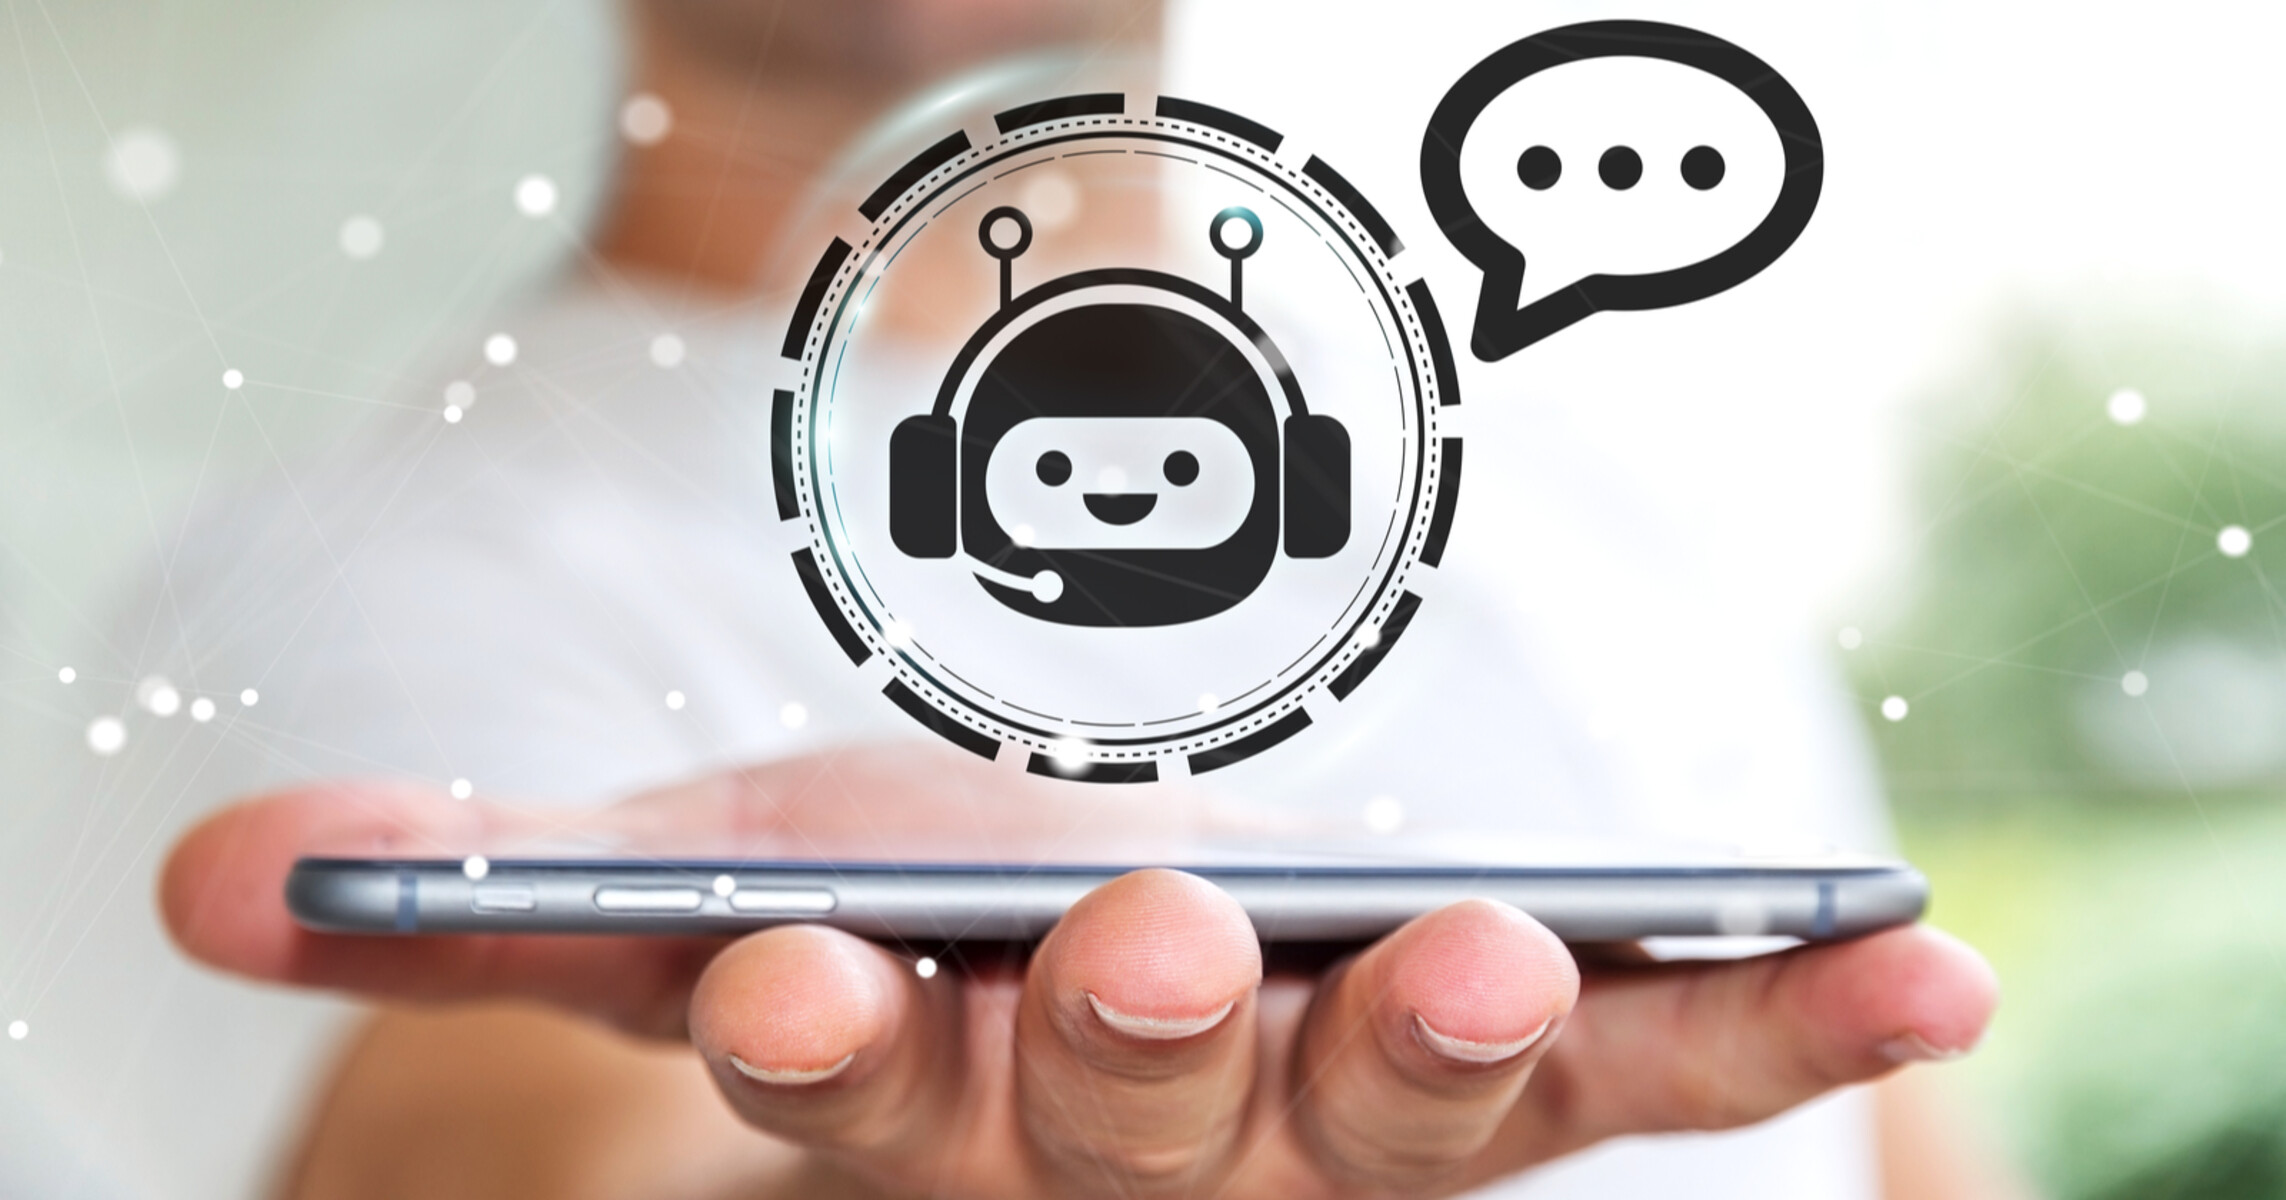 How To Make Money On Chatbots